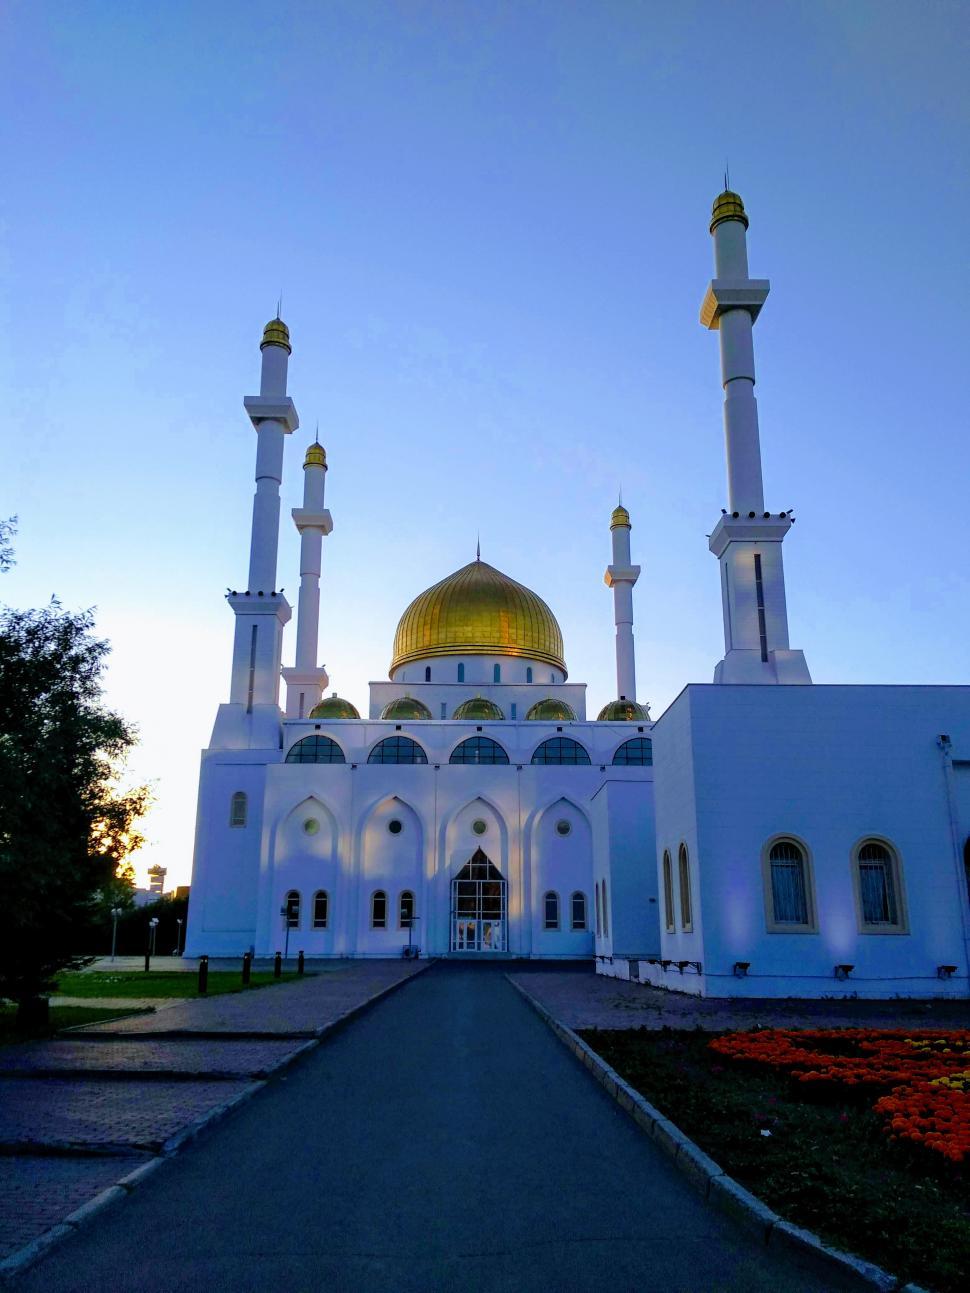 Free Image of White Building With Yellow Dome 